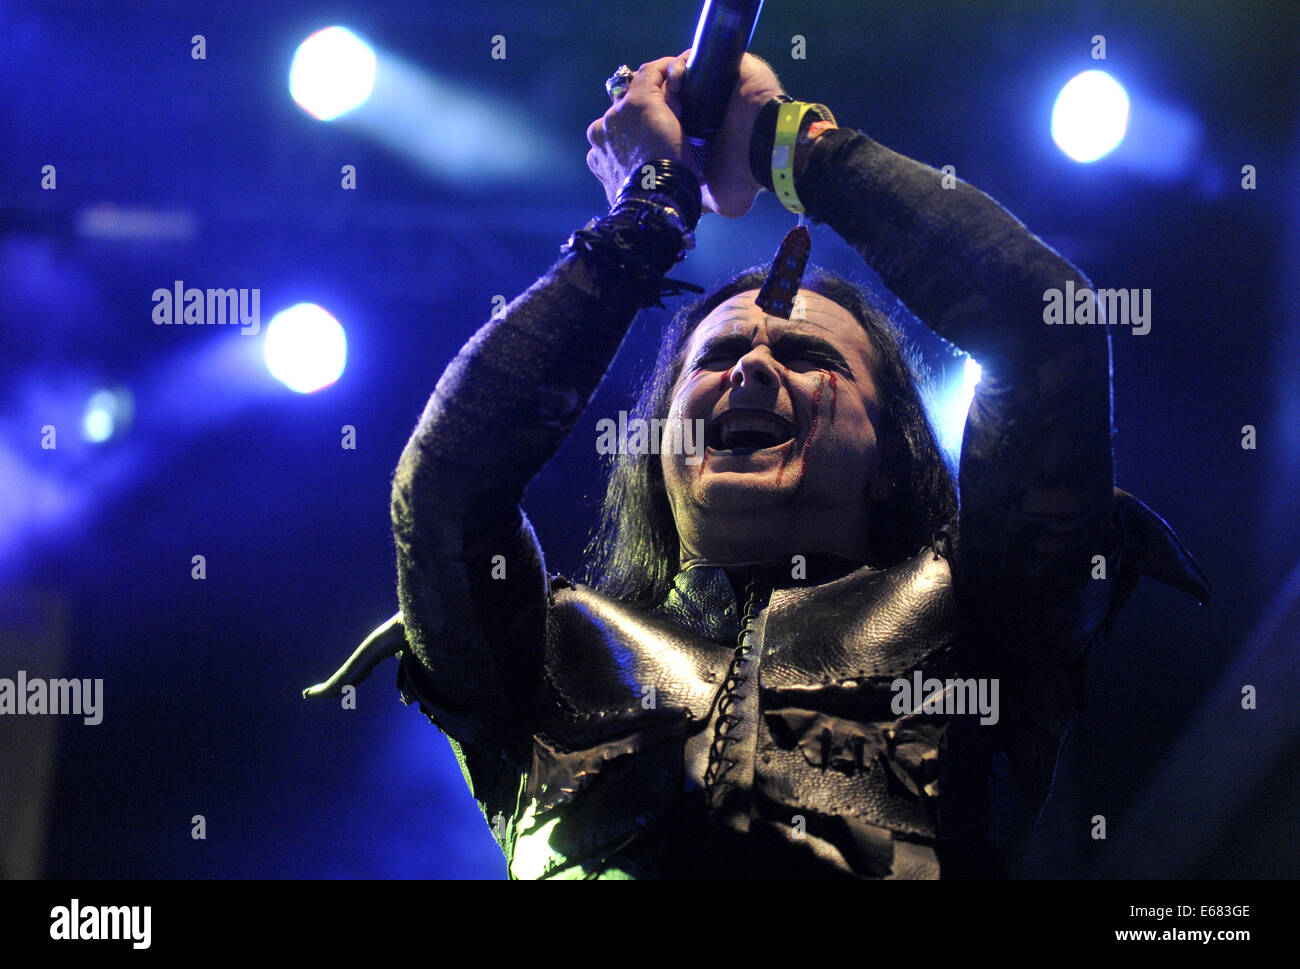 Cradle of Filth band performed live during Music festival Trutnoff in Trutnov, Czech Republic on August 15, 2014. Singer Dani Firth pictured. (CTK Photo/Josef Vostarek) Stock Photo